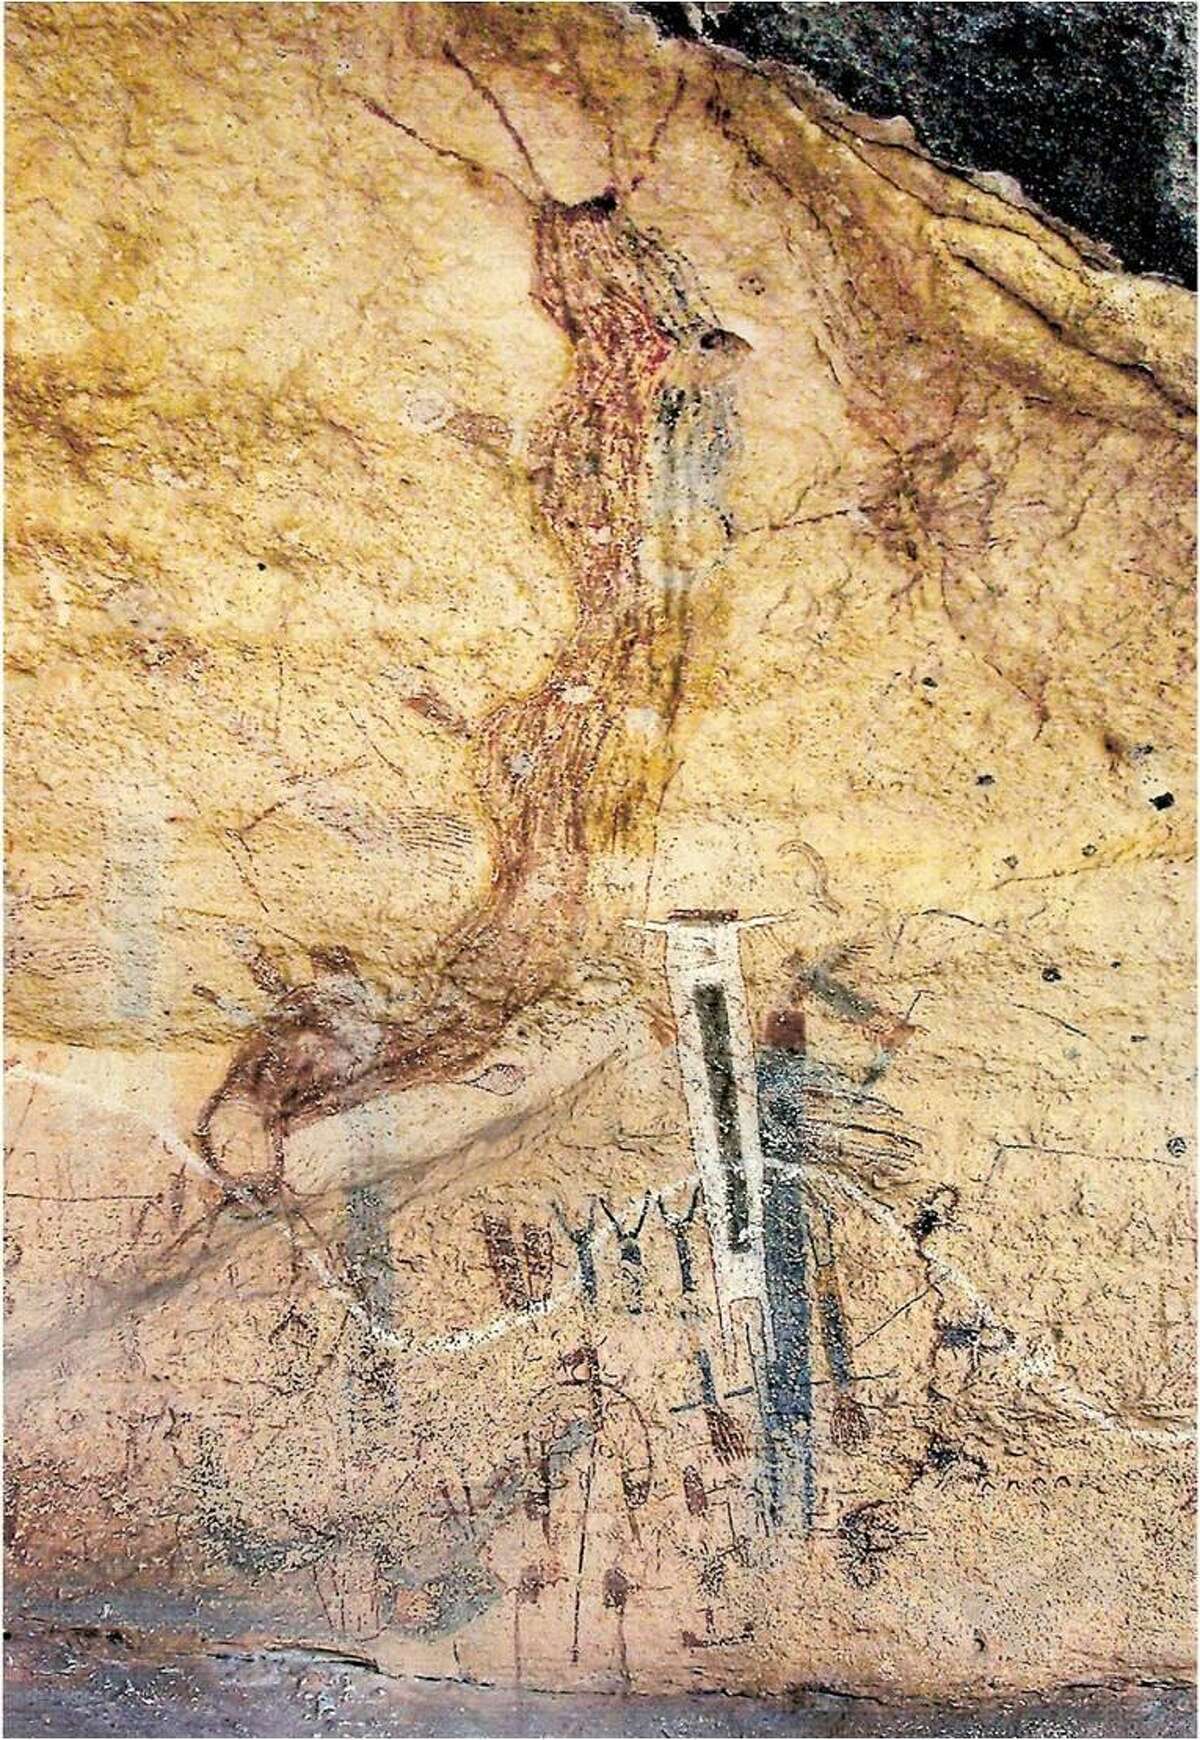 The White Shaman Preserve draws scholars from around the world to study the rock art adorning the walls. The best-known work at the site is the White Shaman mural, which is 26 feet long.